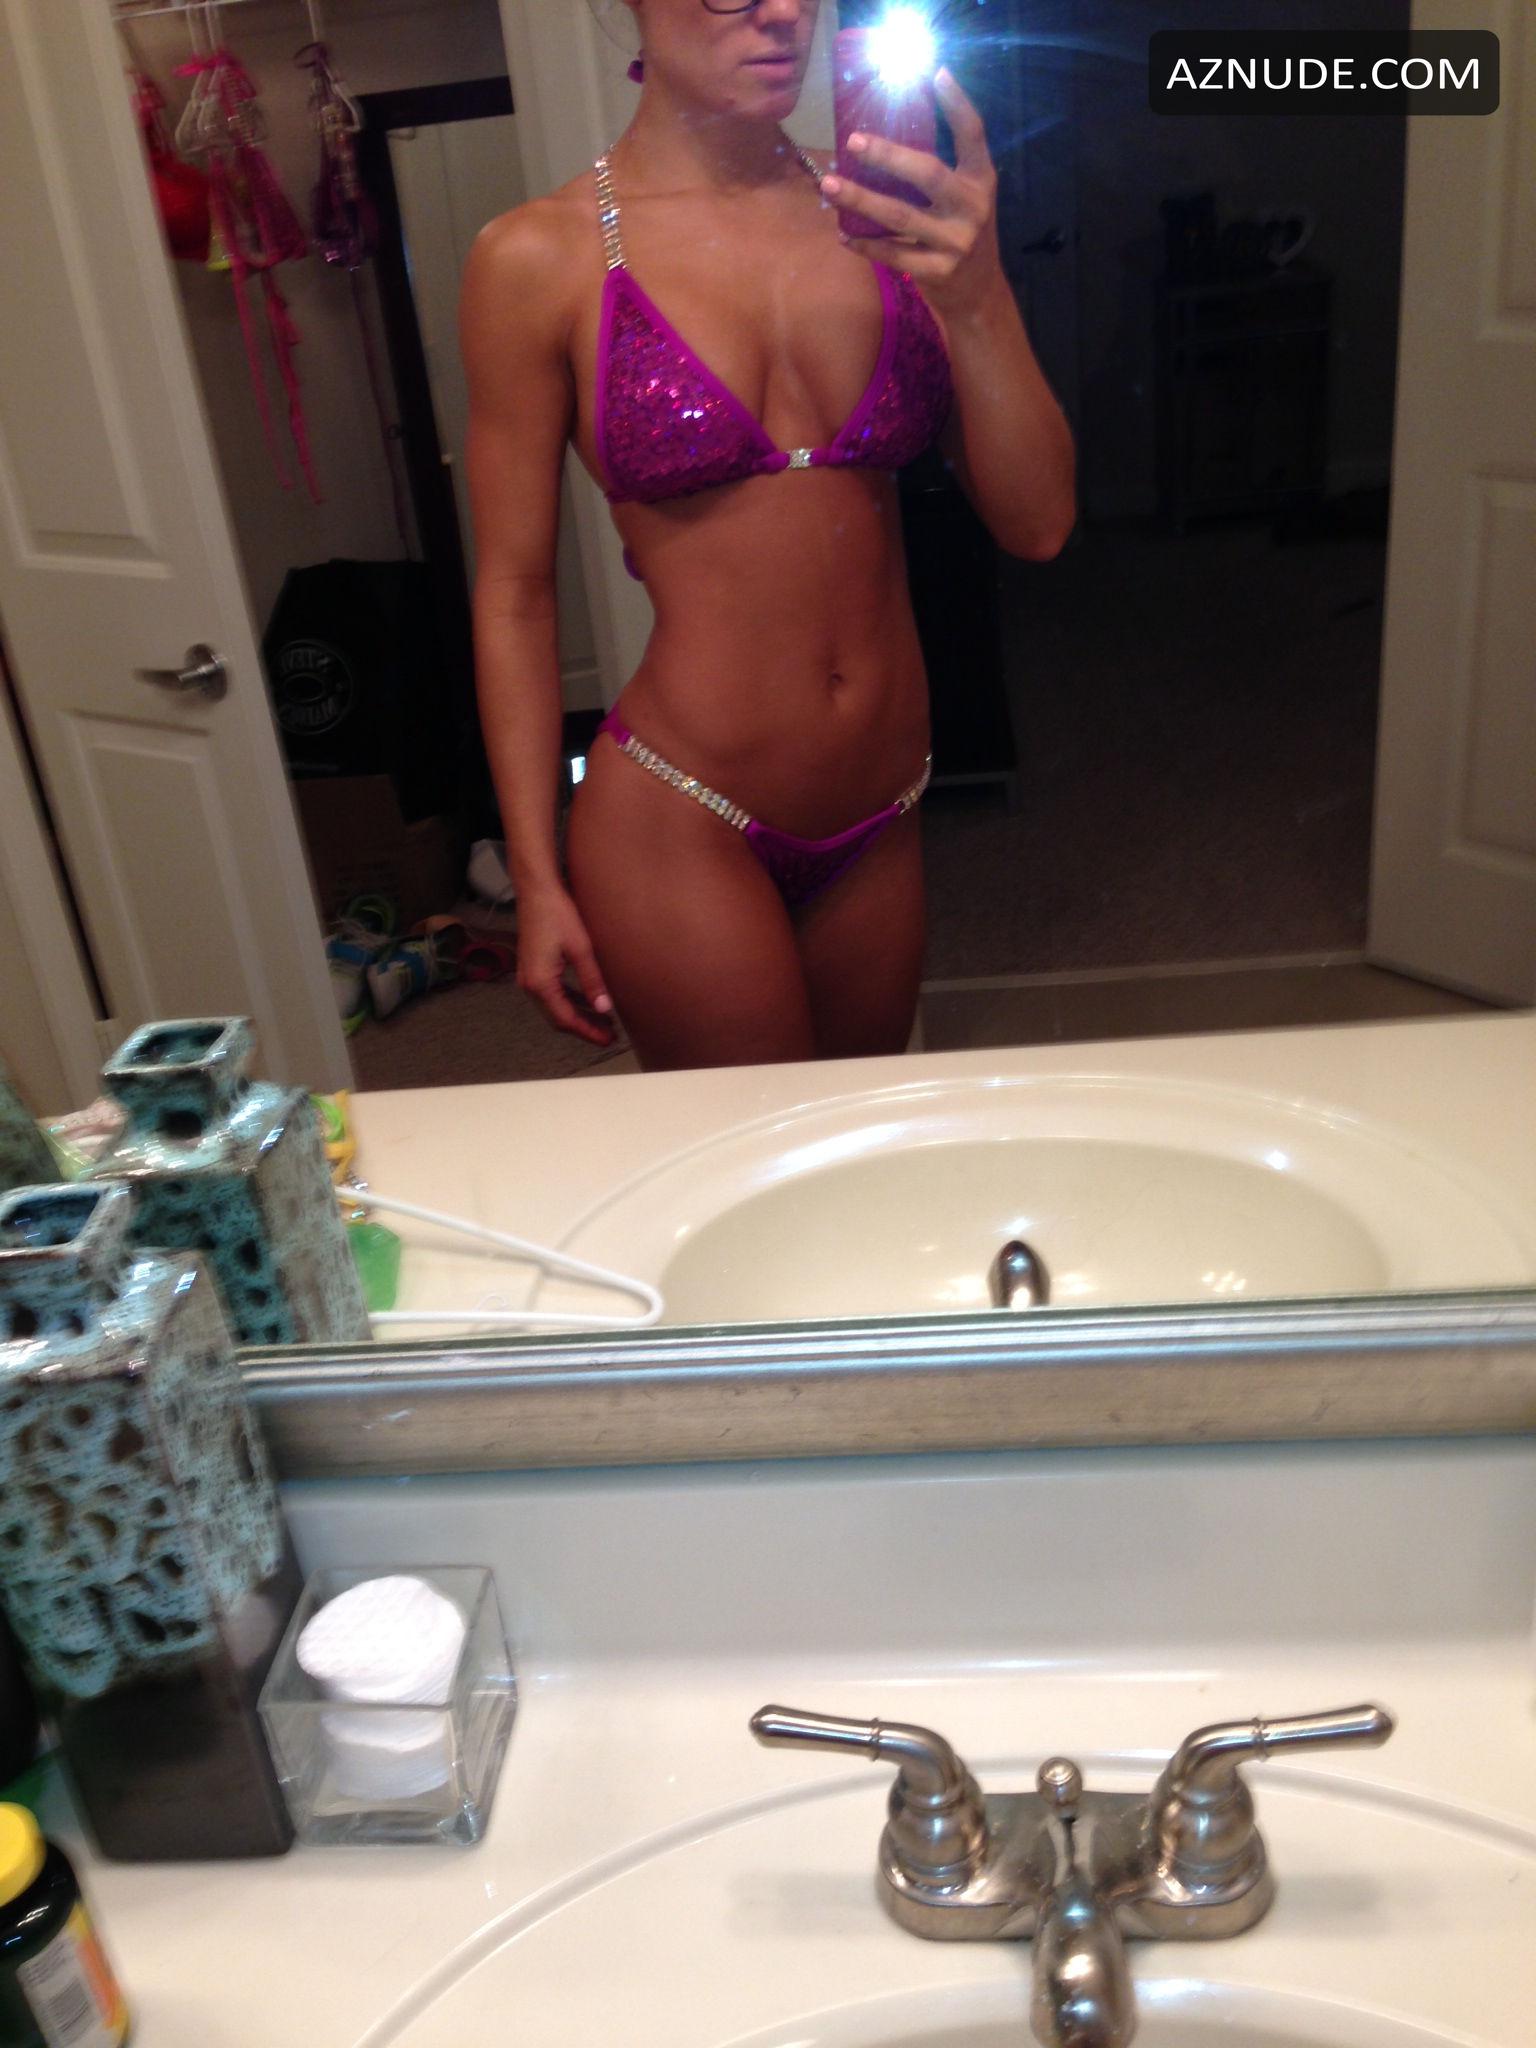 FORMER WRESTLER GAIL KIM NUDE LEAKED PHOTOS And VIDEO | Celebs Nude  Pictures and Videos